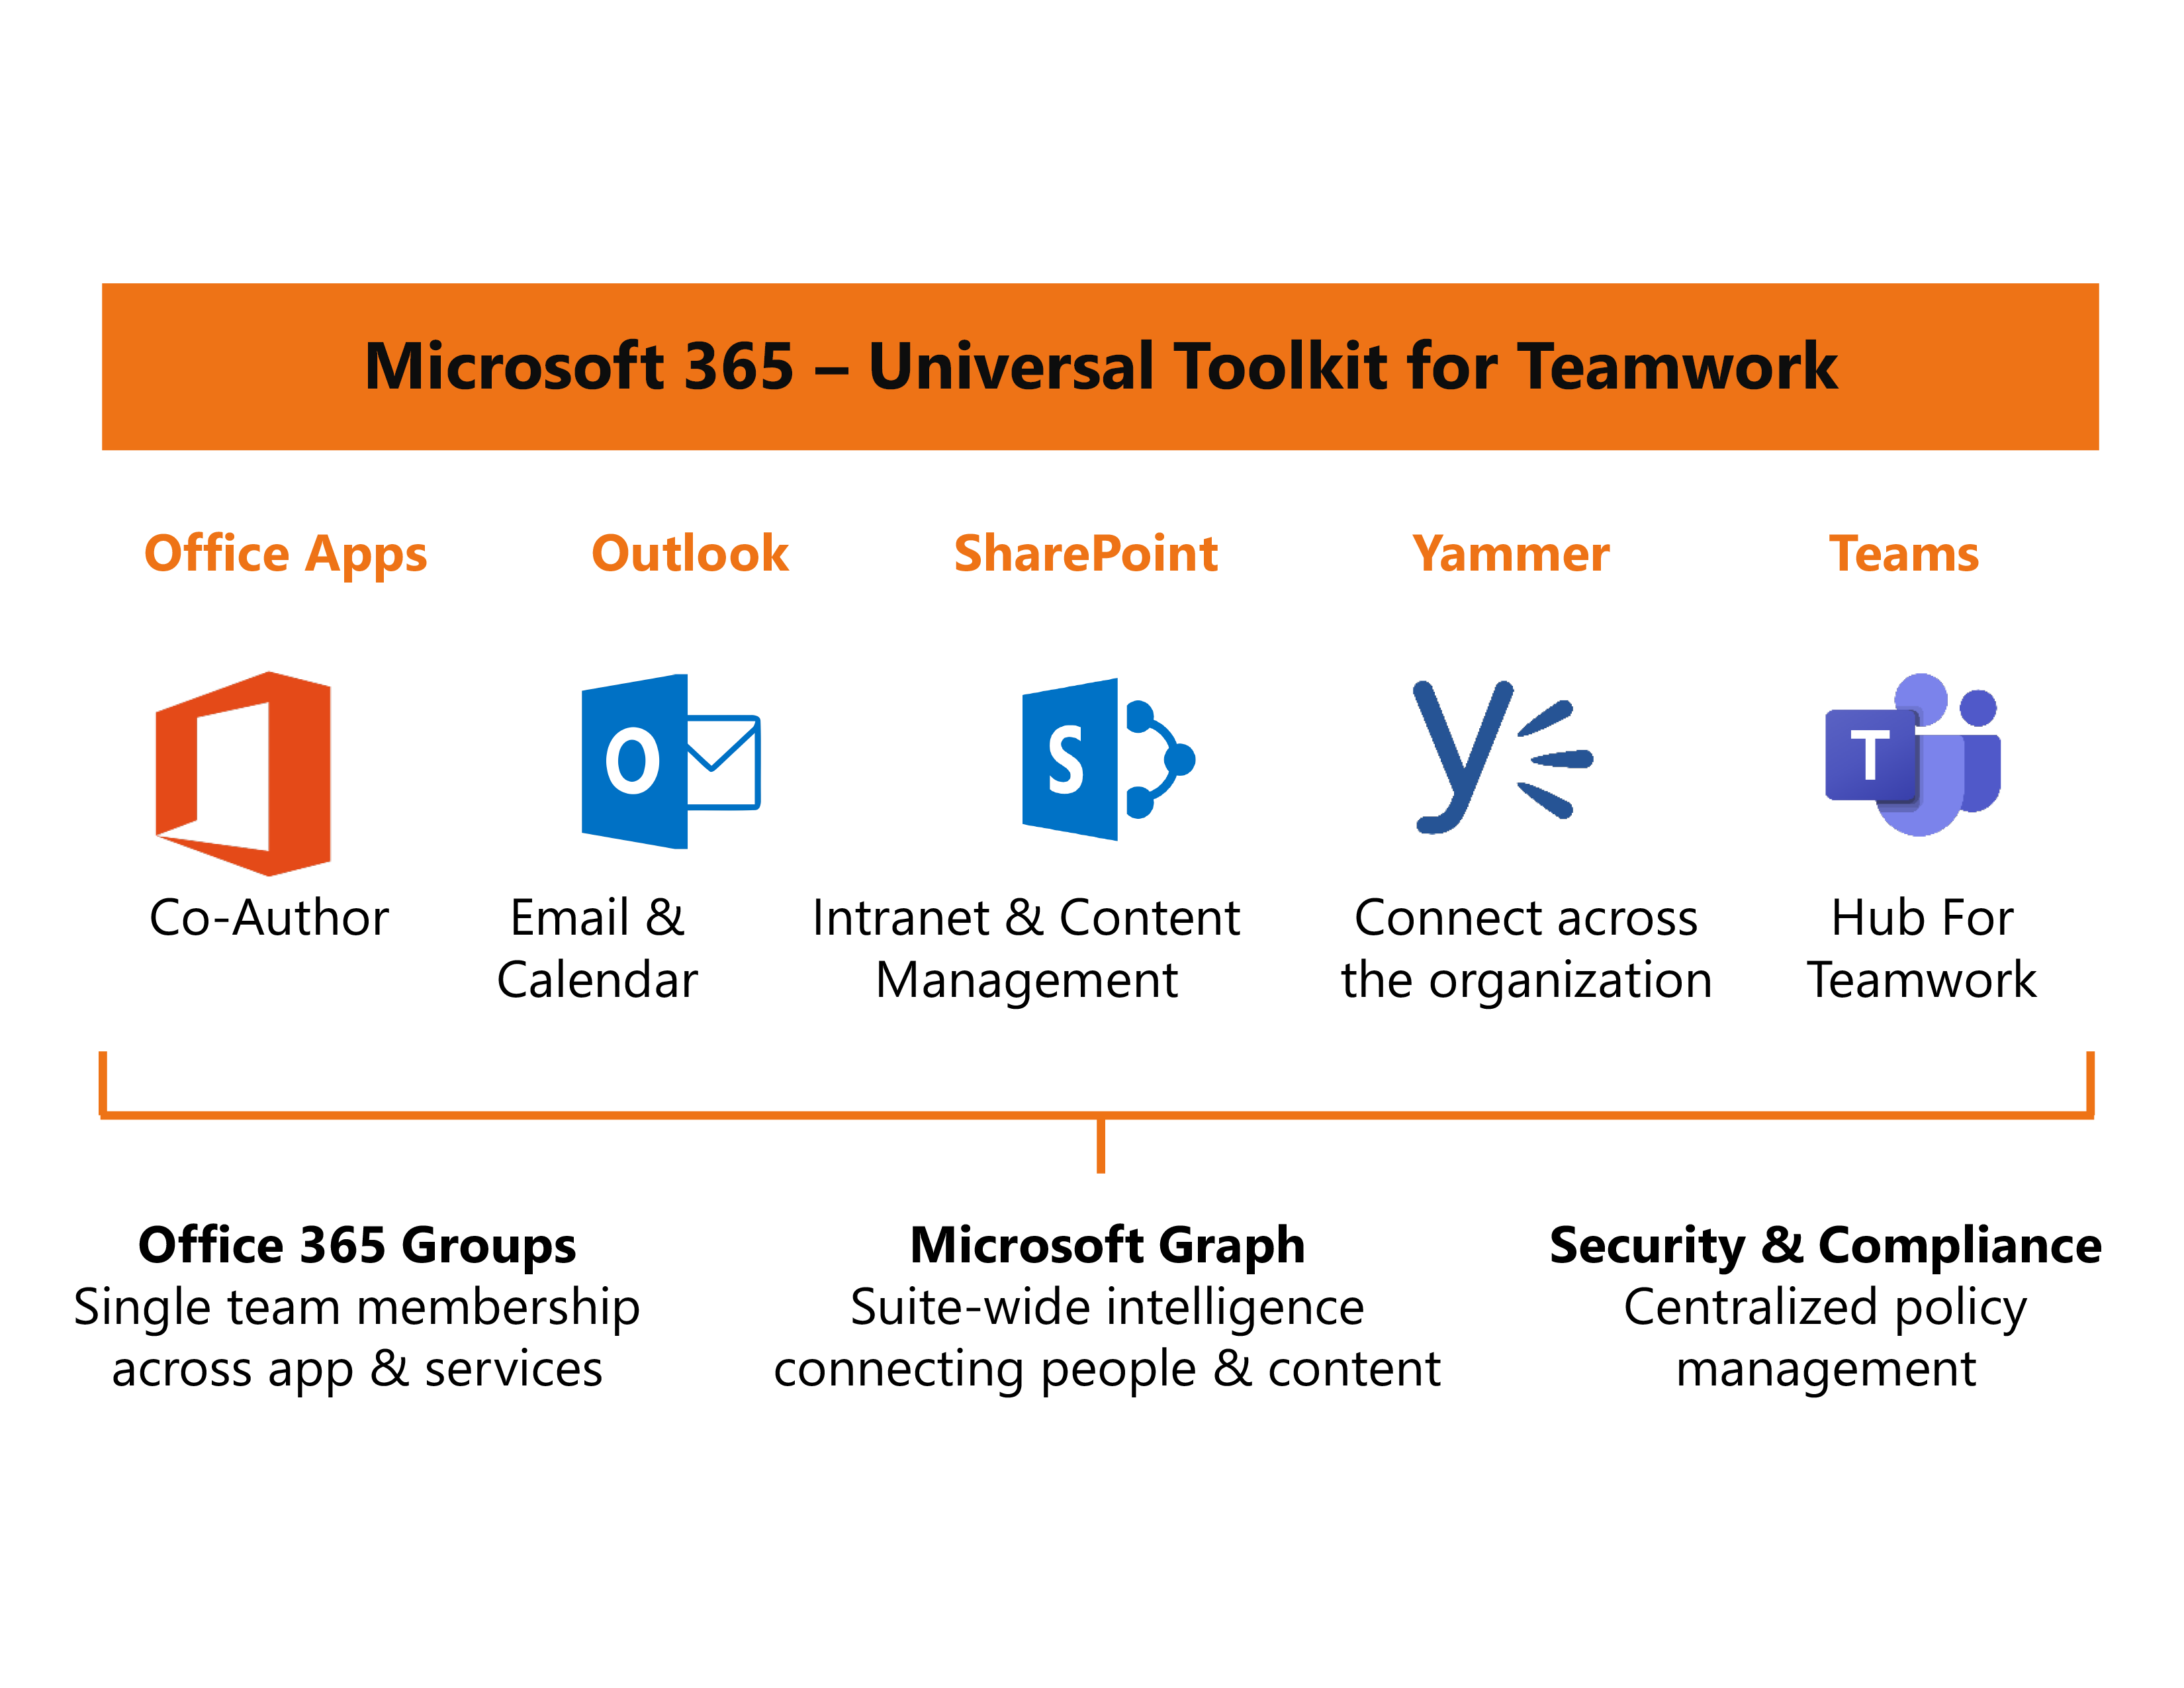 Securing the modern workplace with Microsoft 365 threat protection - part 1  - Microsoft Security Blog